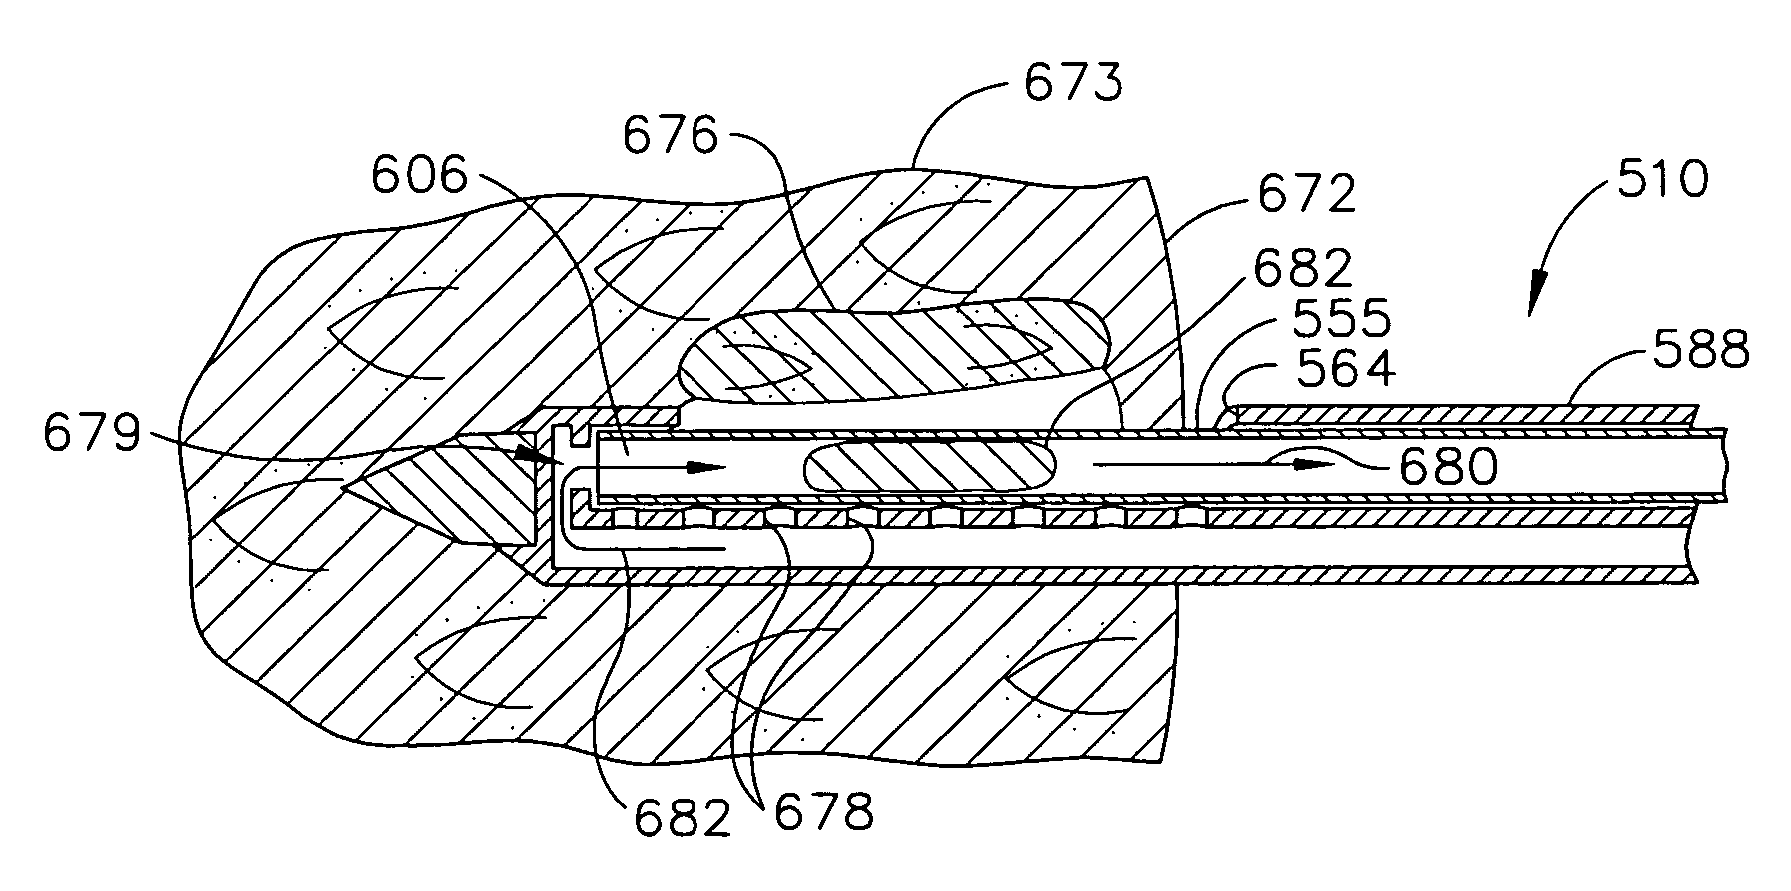 Biopsy device with variable side aperture